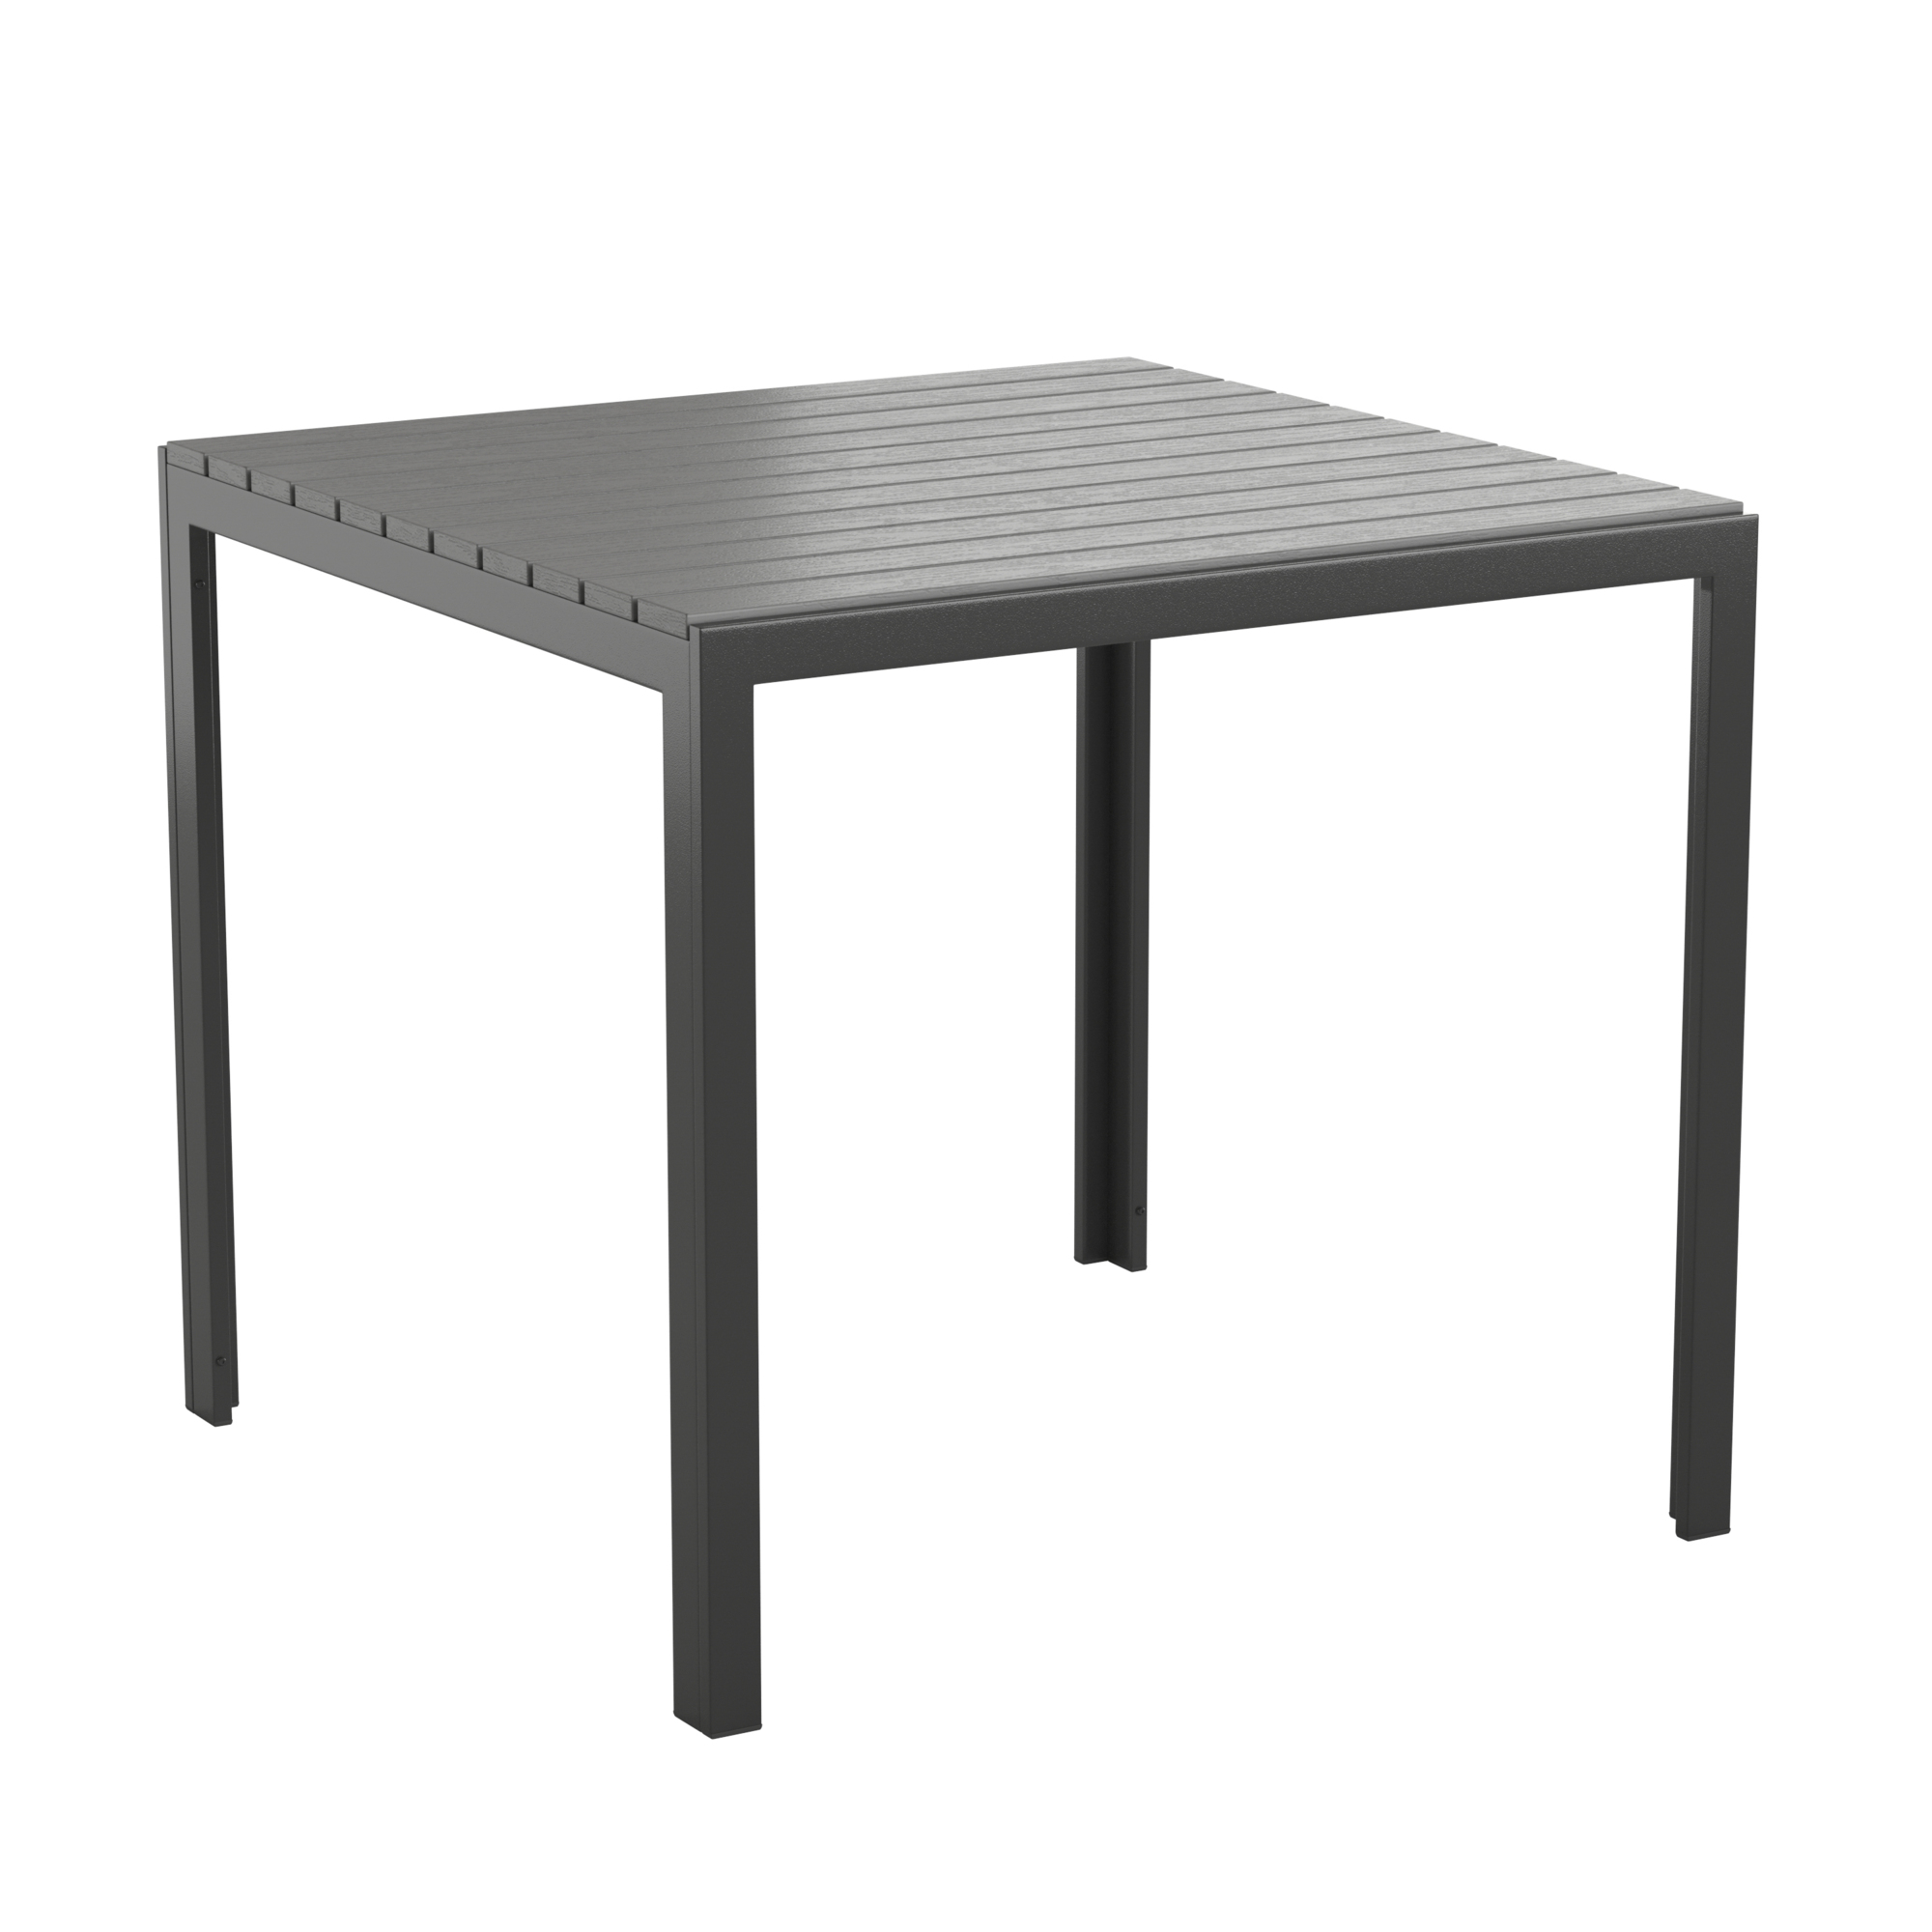 Flash Furniture, Black Patio Table with Poly Resin Slatted Top, Table Shape Square, Primary Color Black, Height 28.75 in, Model SBA268TBK